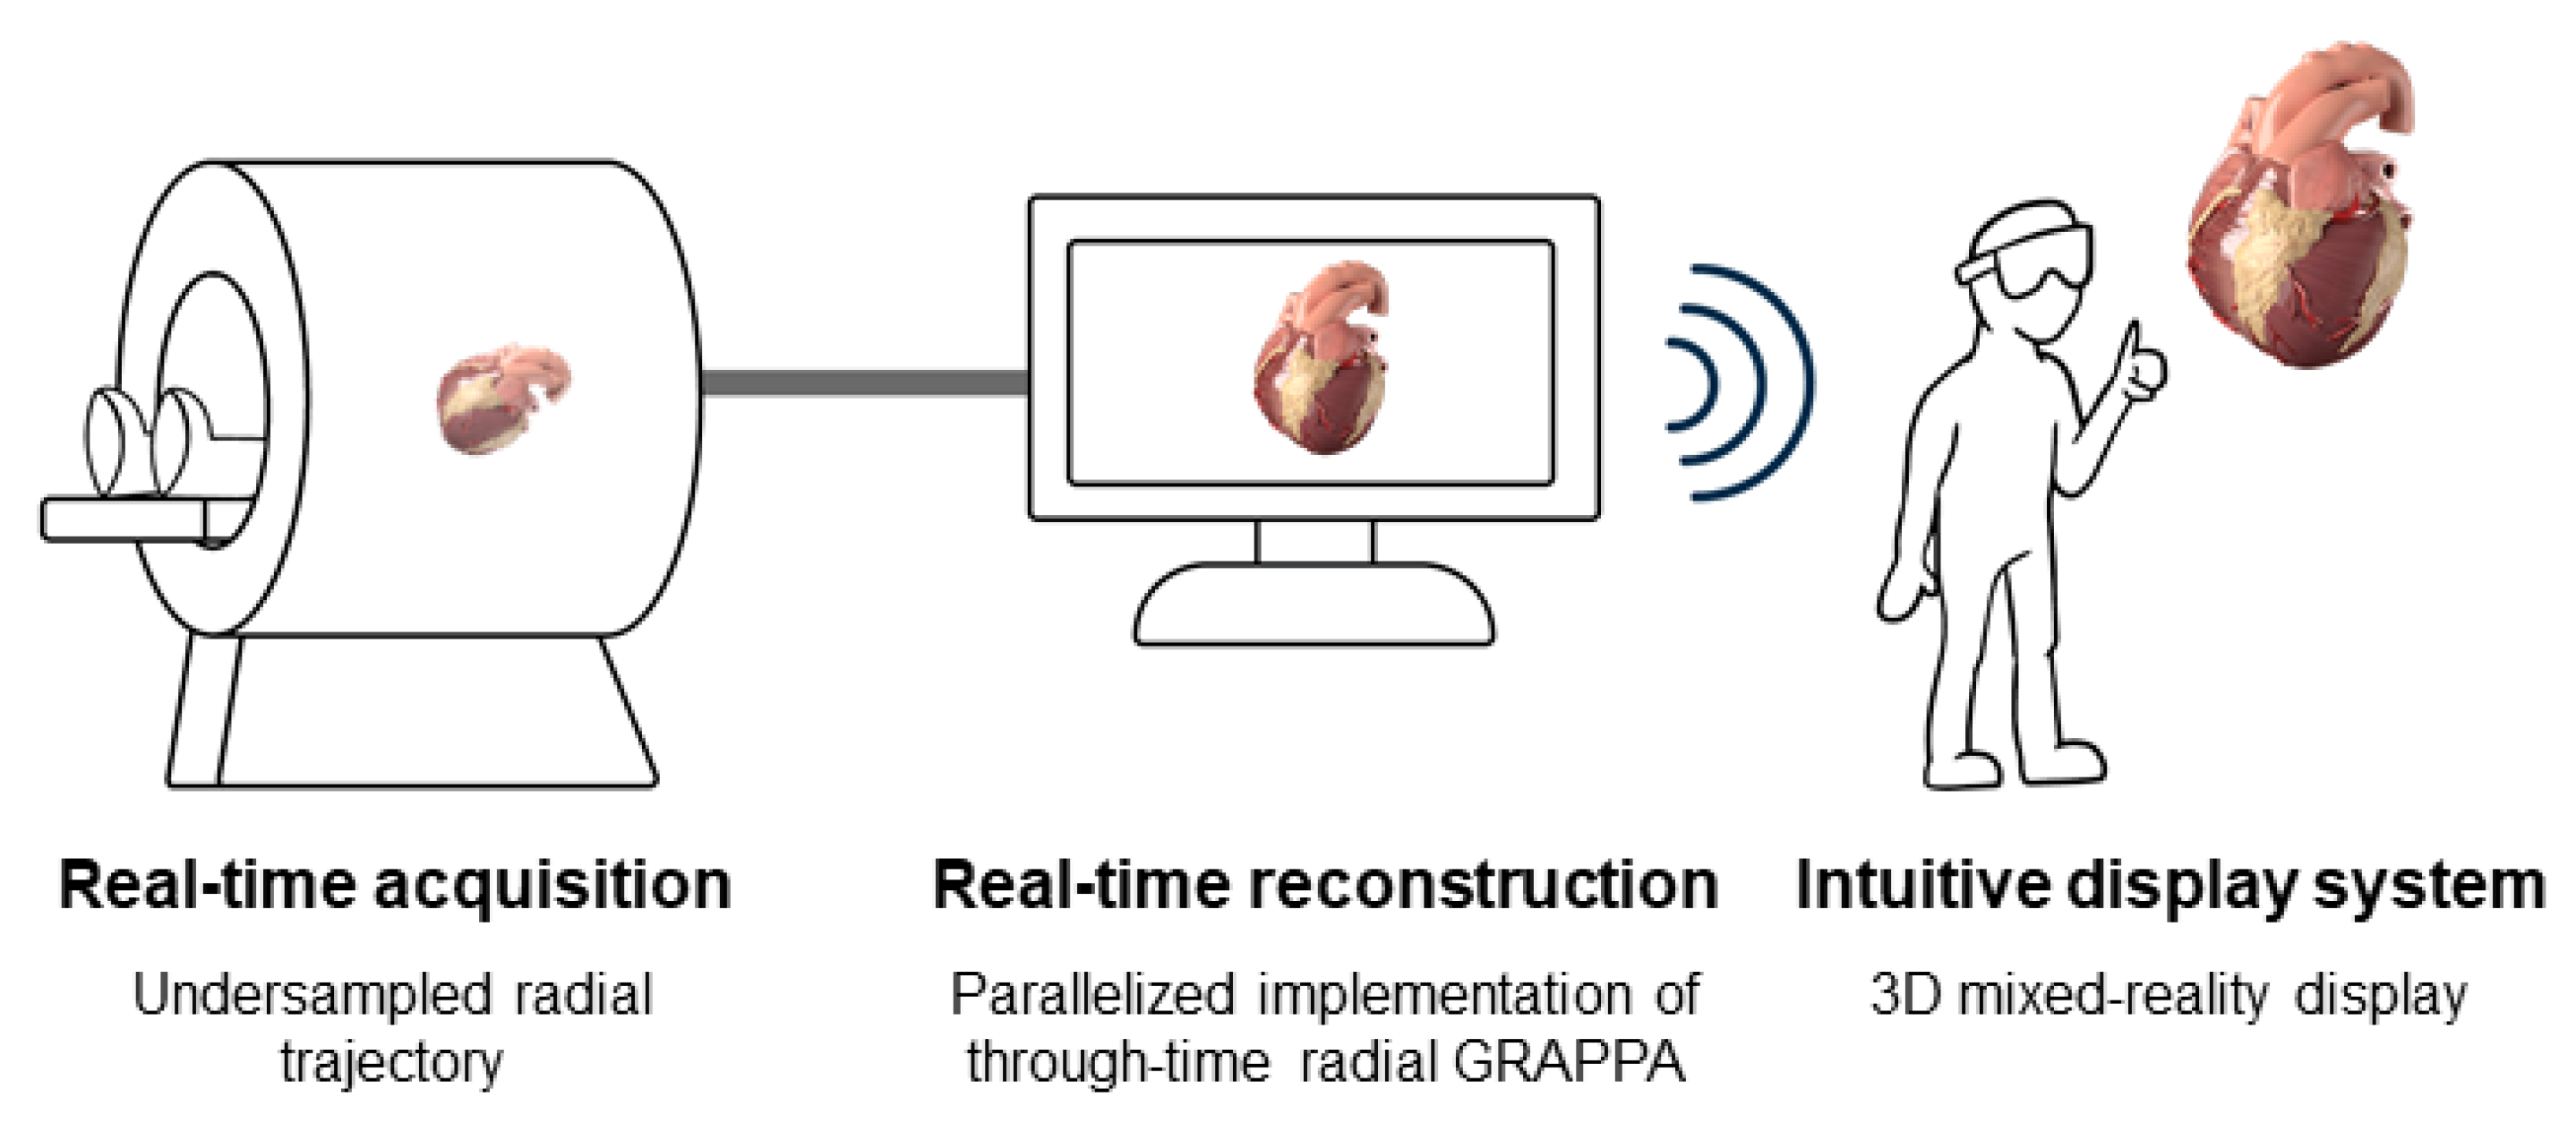 J. Imaging | Free Full-Text | A System for Real-Time, Online Mixed-Reality  Visualization of Cardiac Magnetic Resonance Images